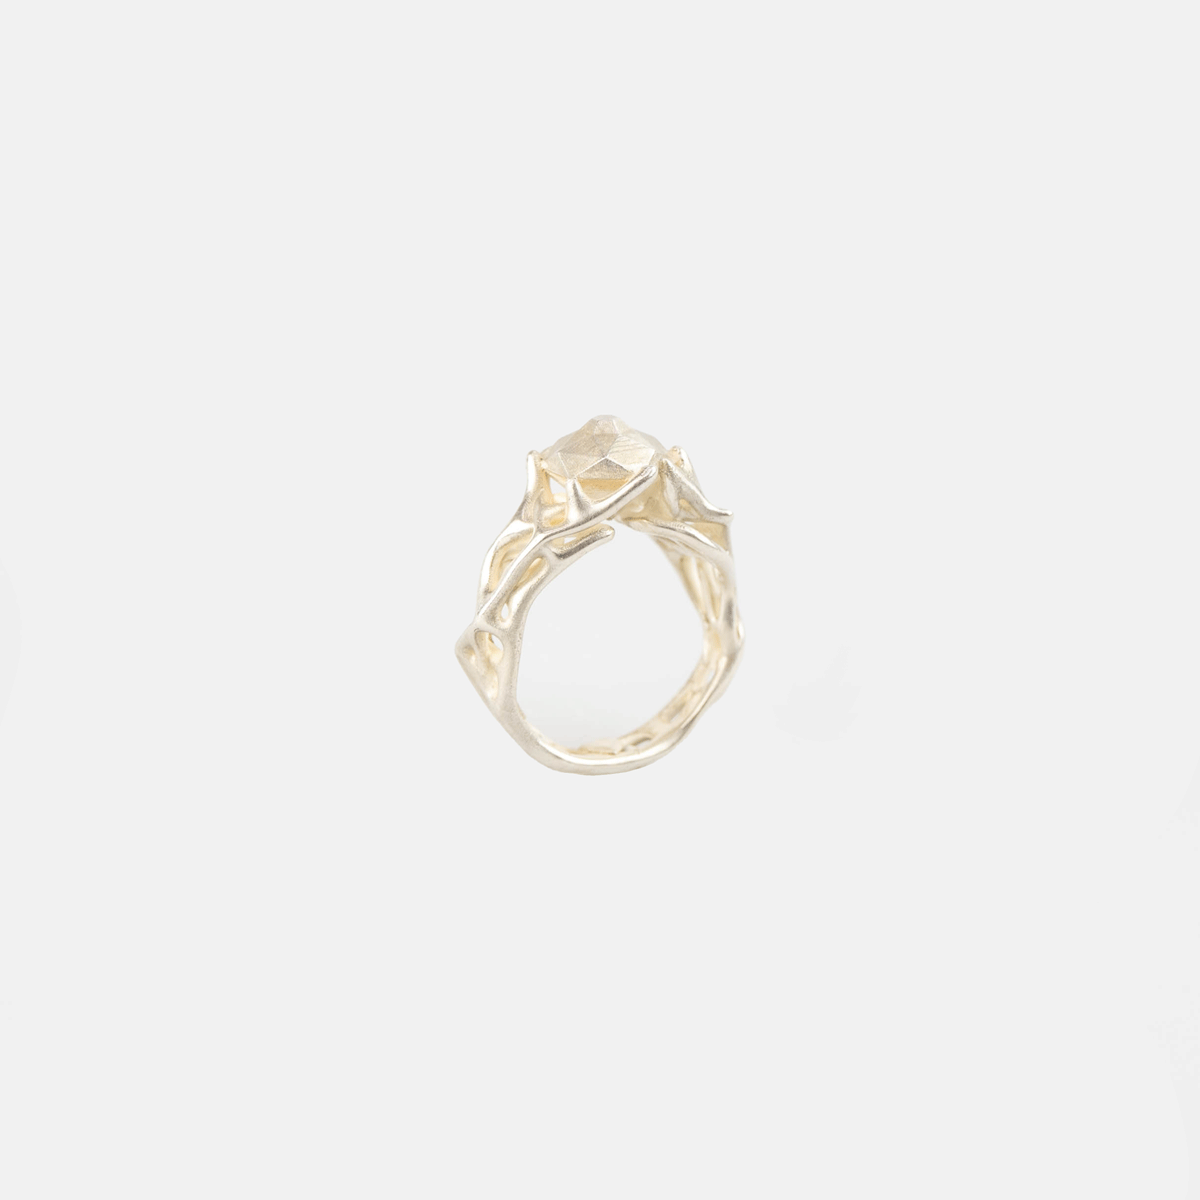 Modus_Ring2_Silver